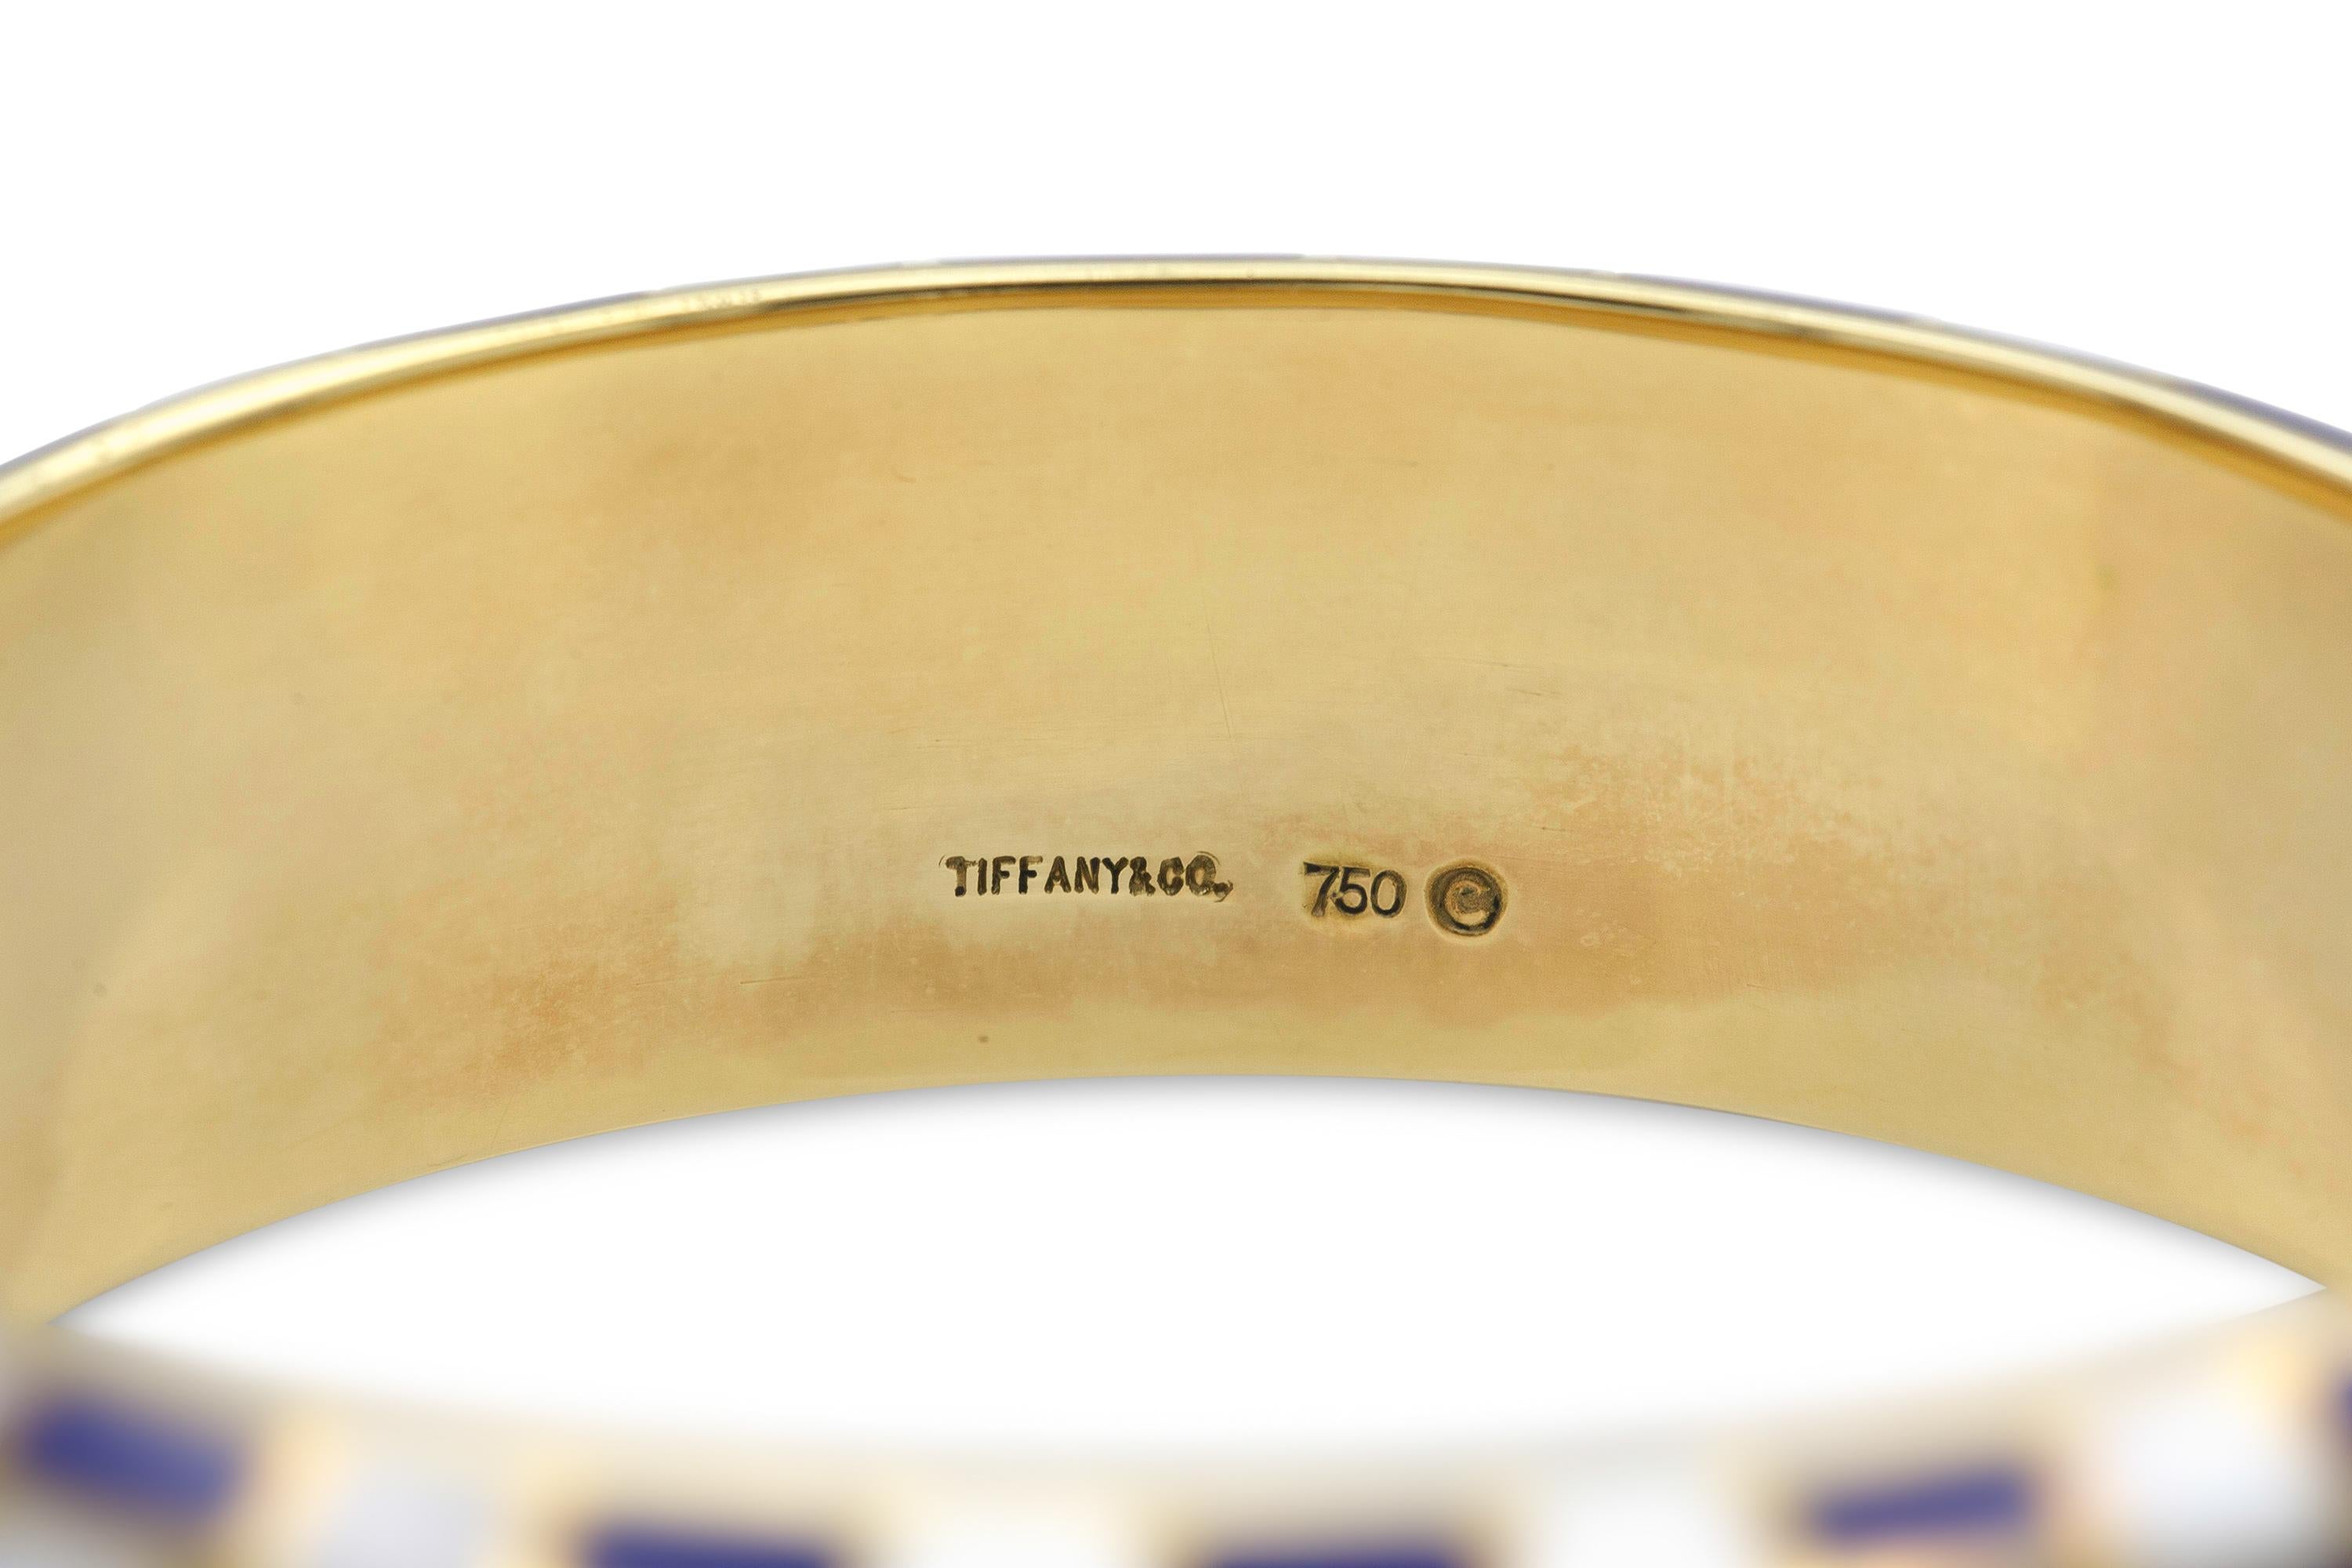 Square Cut Tiffany & Co. Angela Cummings Lapis and Mother of Pearl Bangle Bracelet